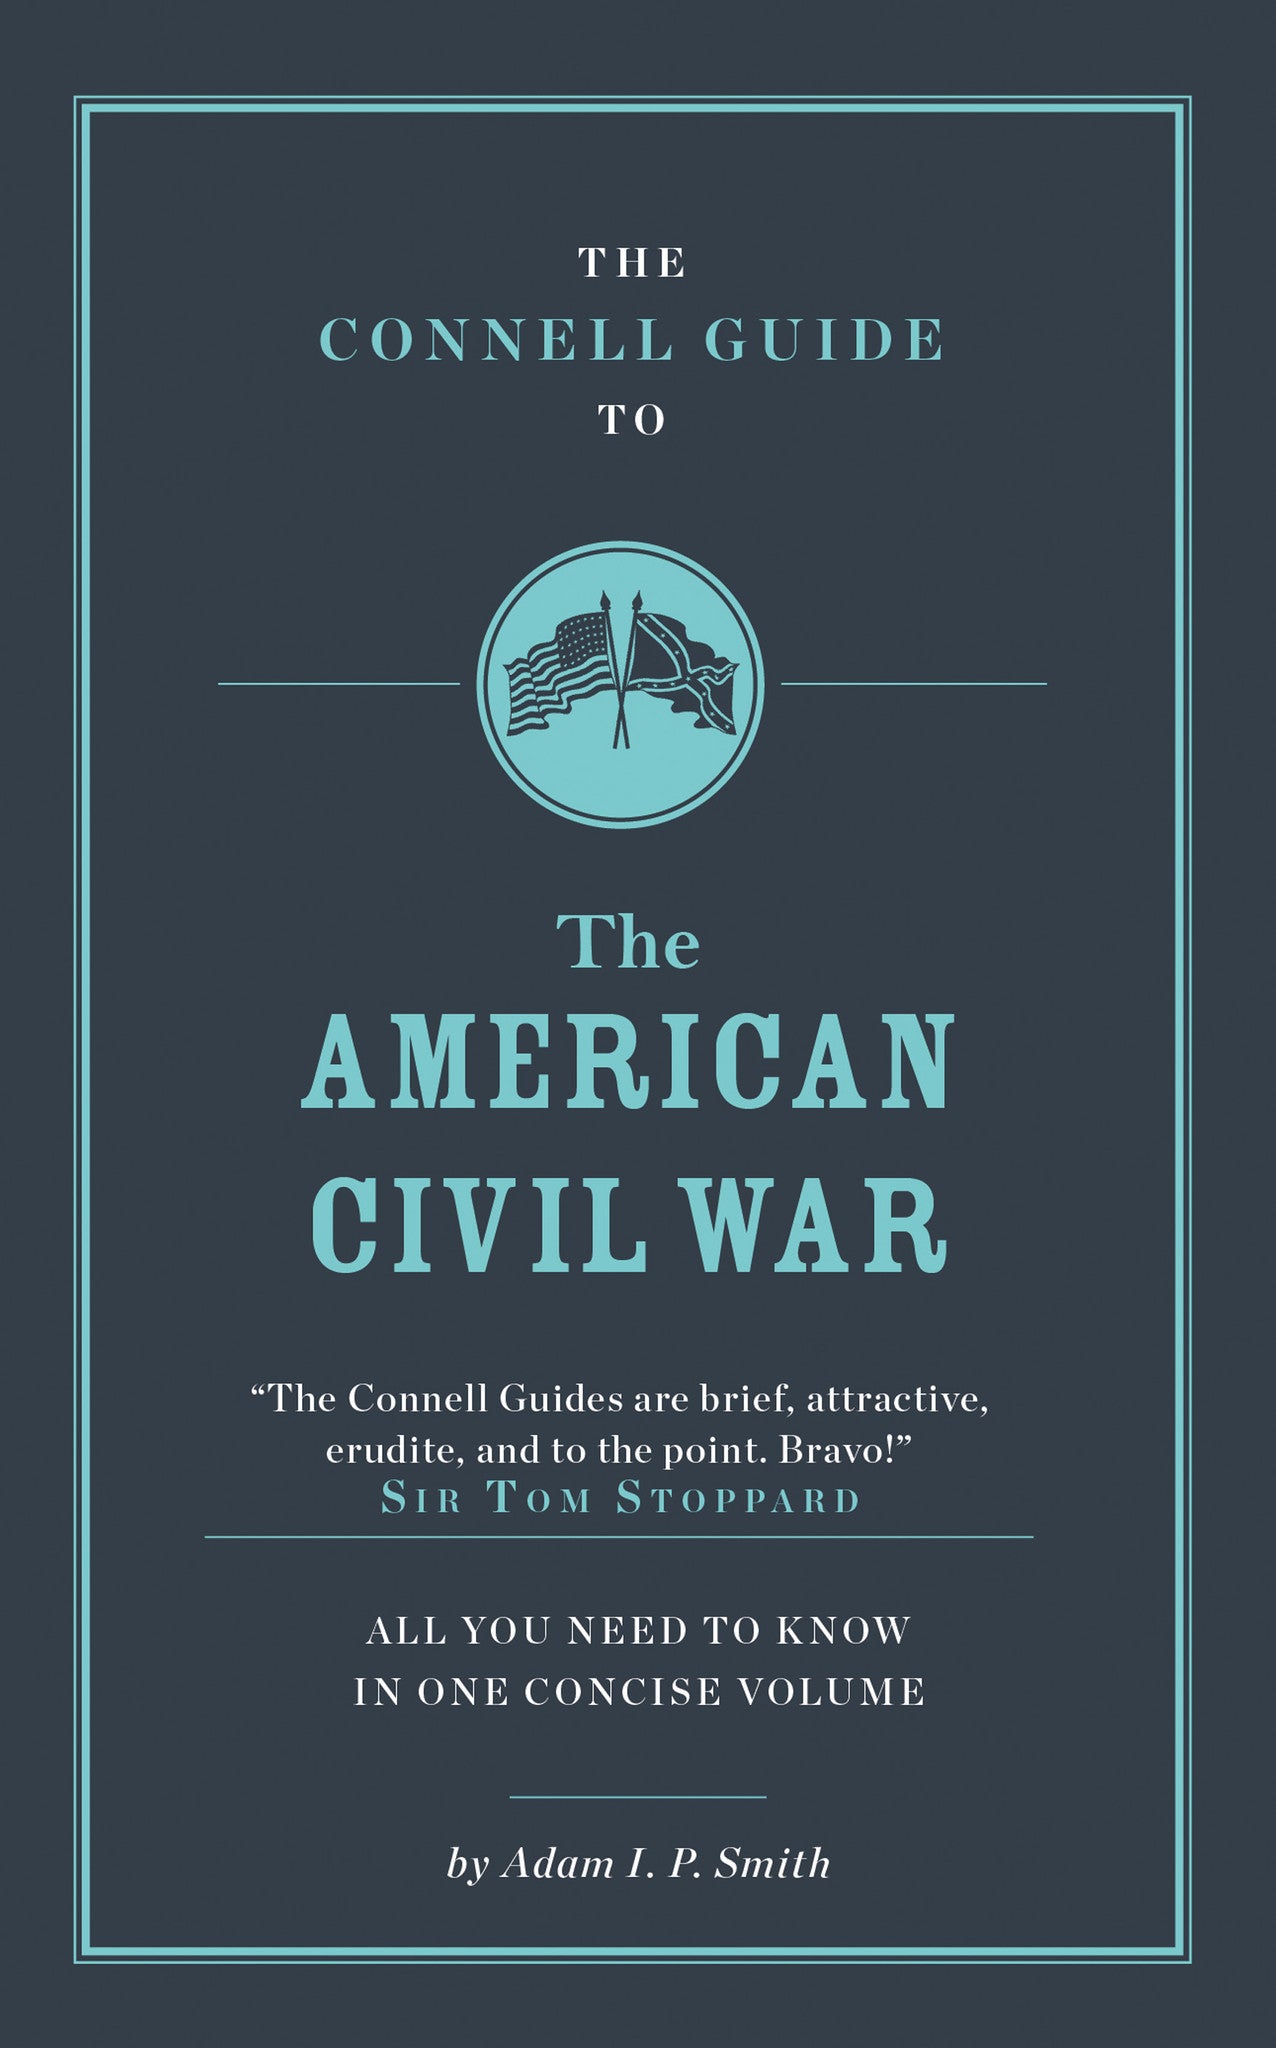 The Connell Guide to The American Civil War